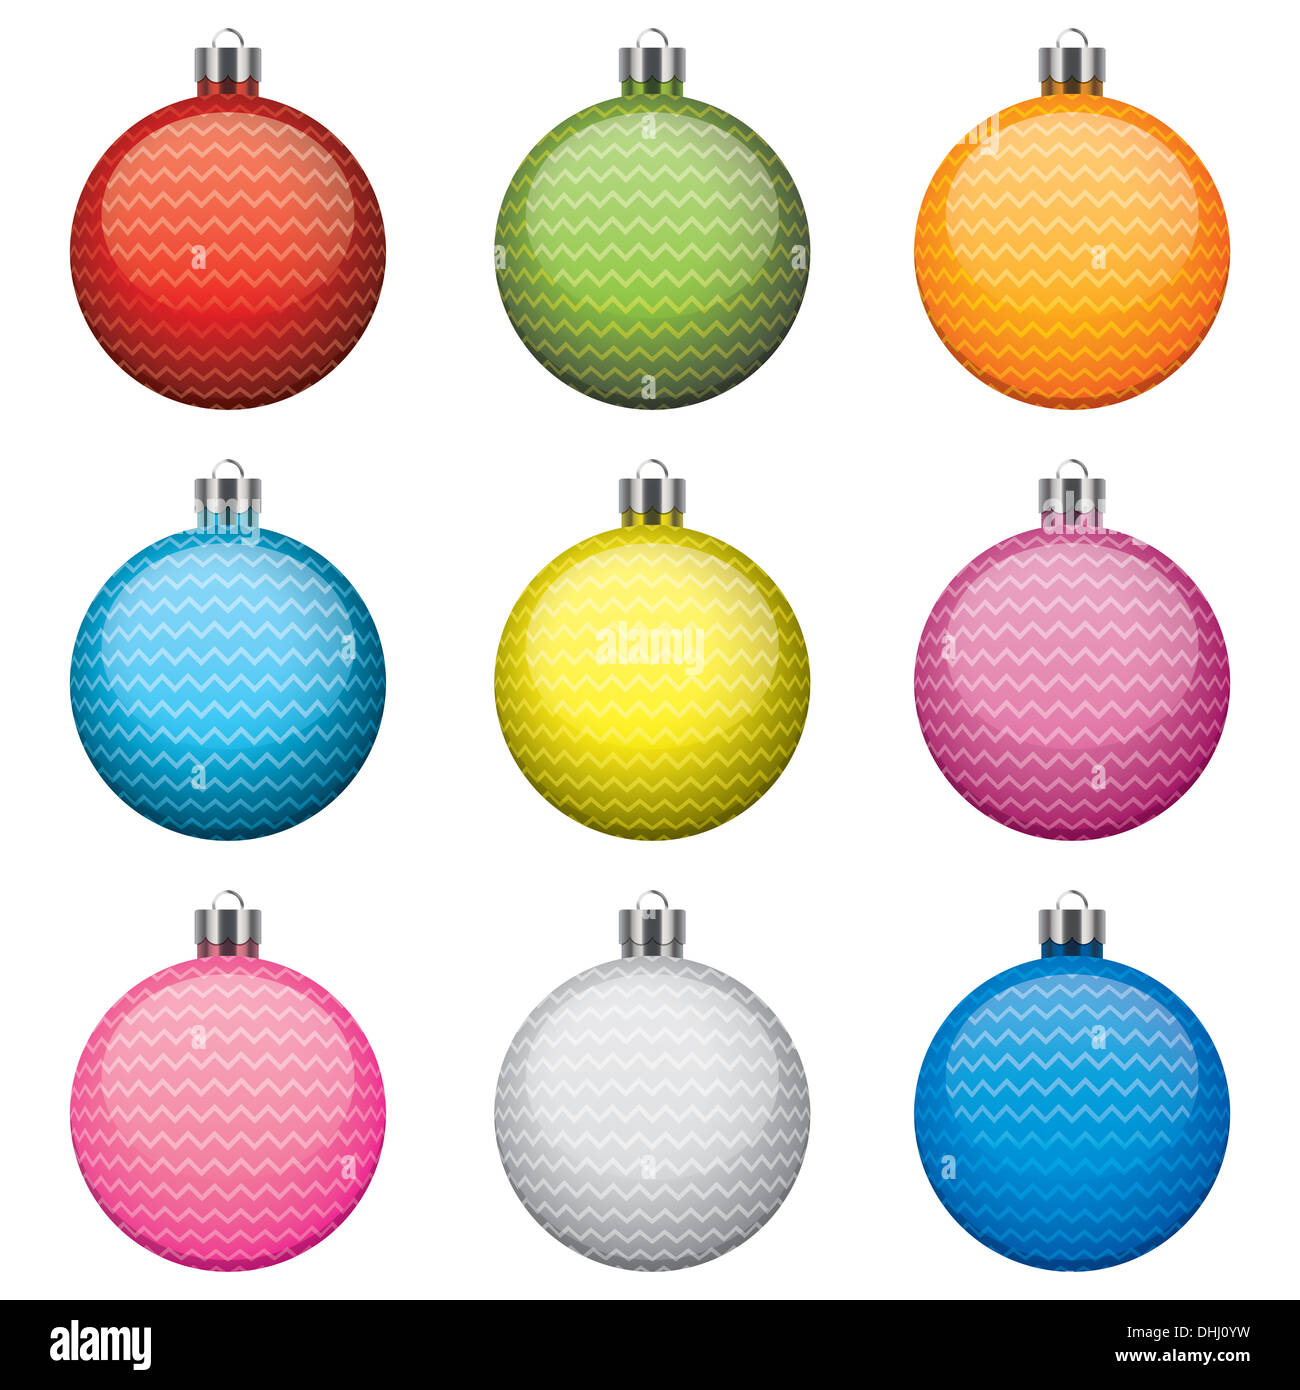 Christmas baubles, different colors and patterns, isolated on white background Stock Photo